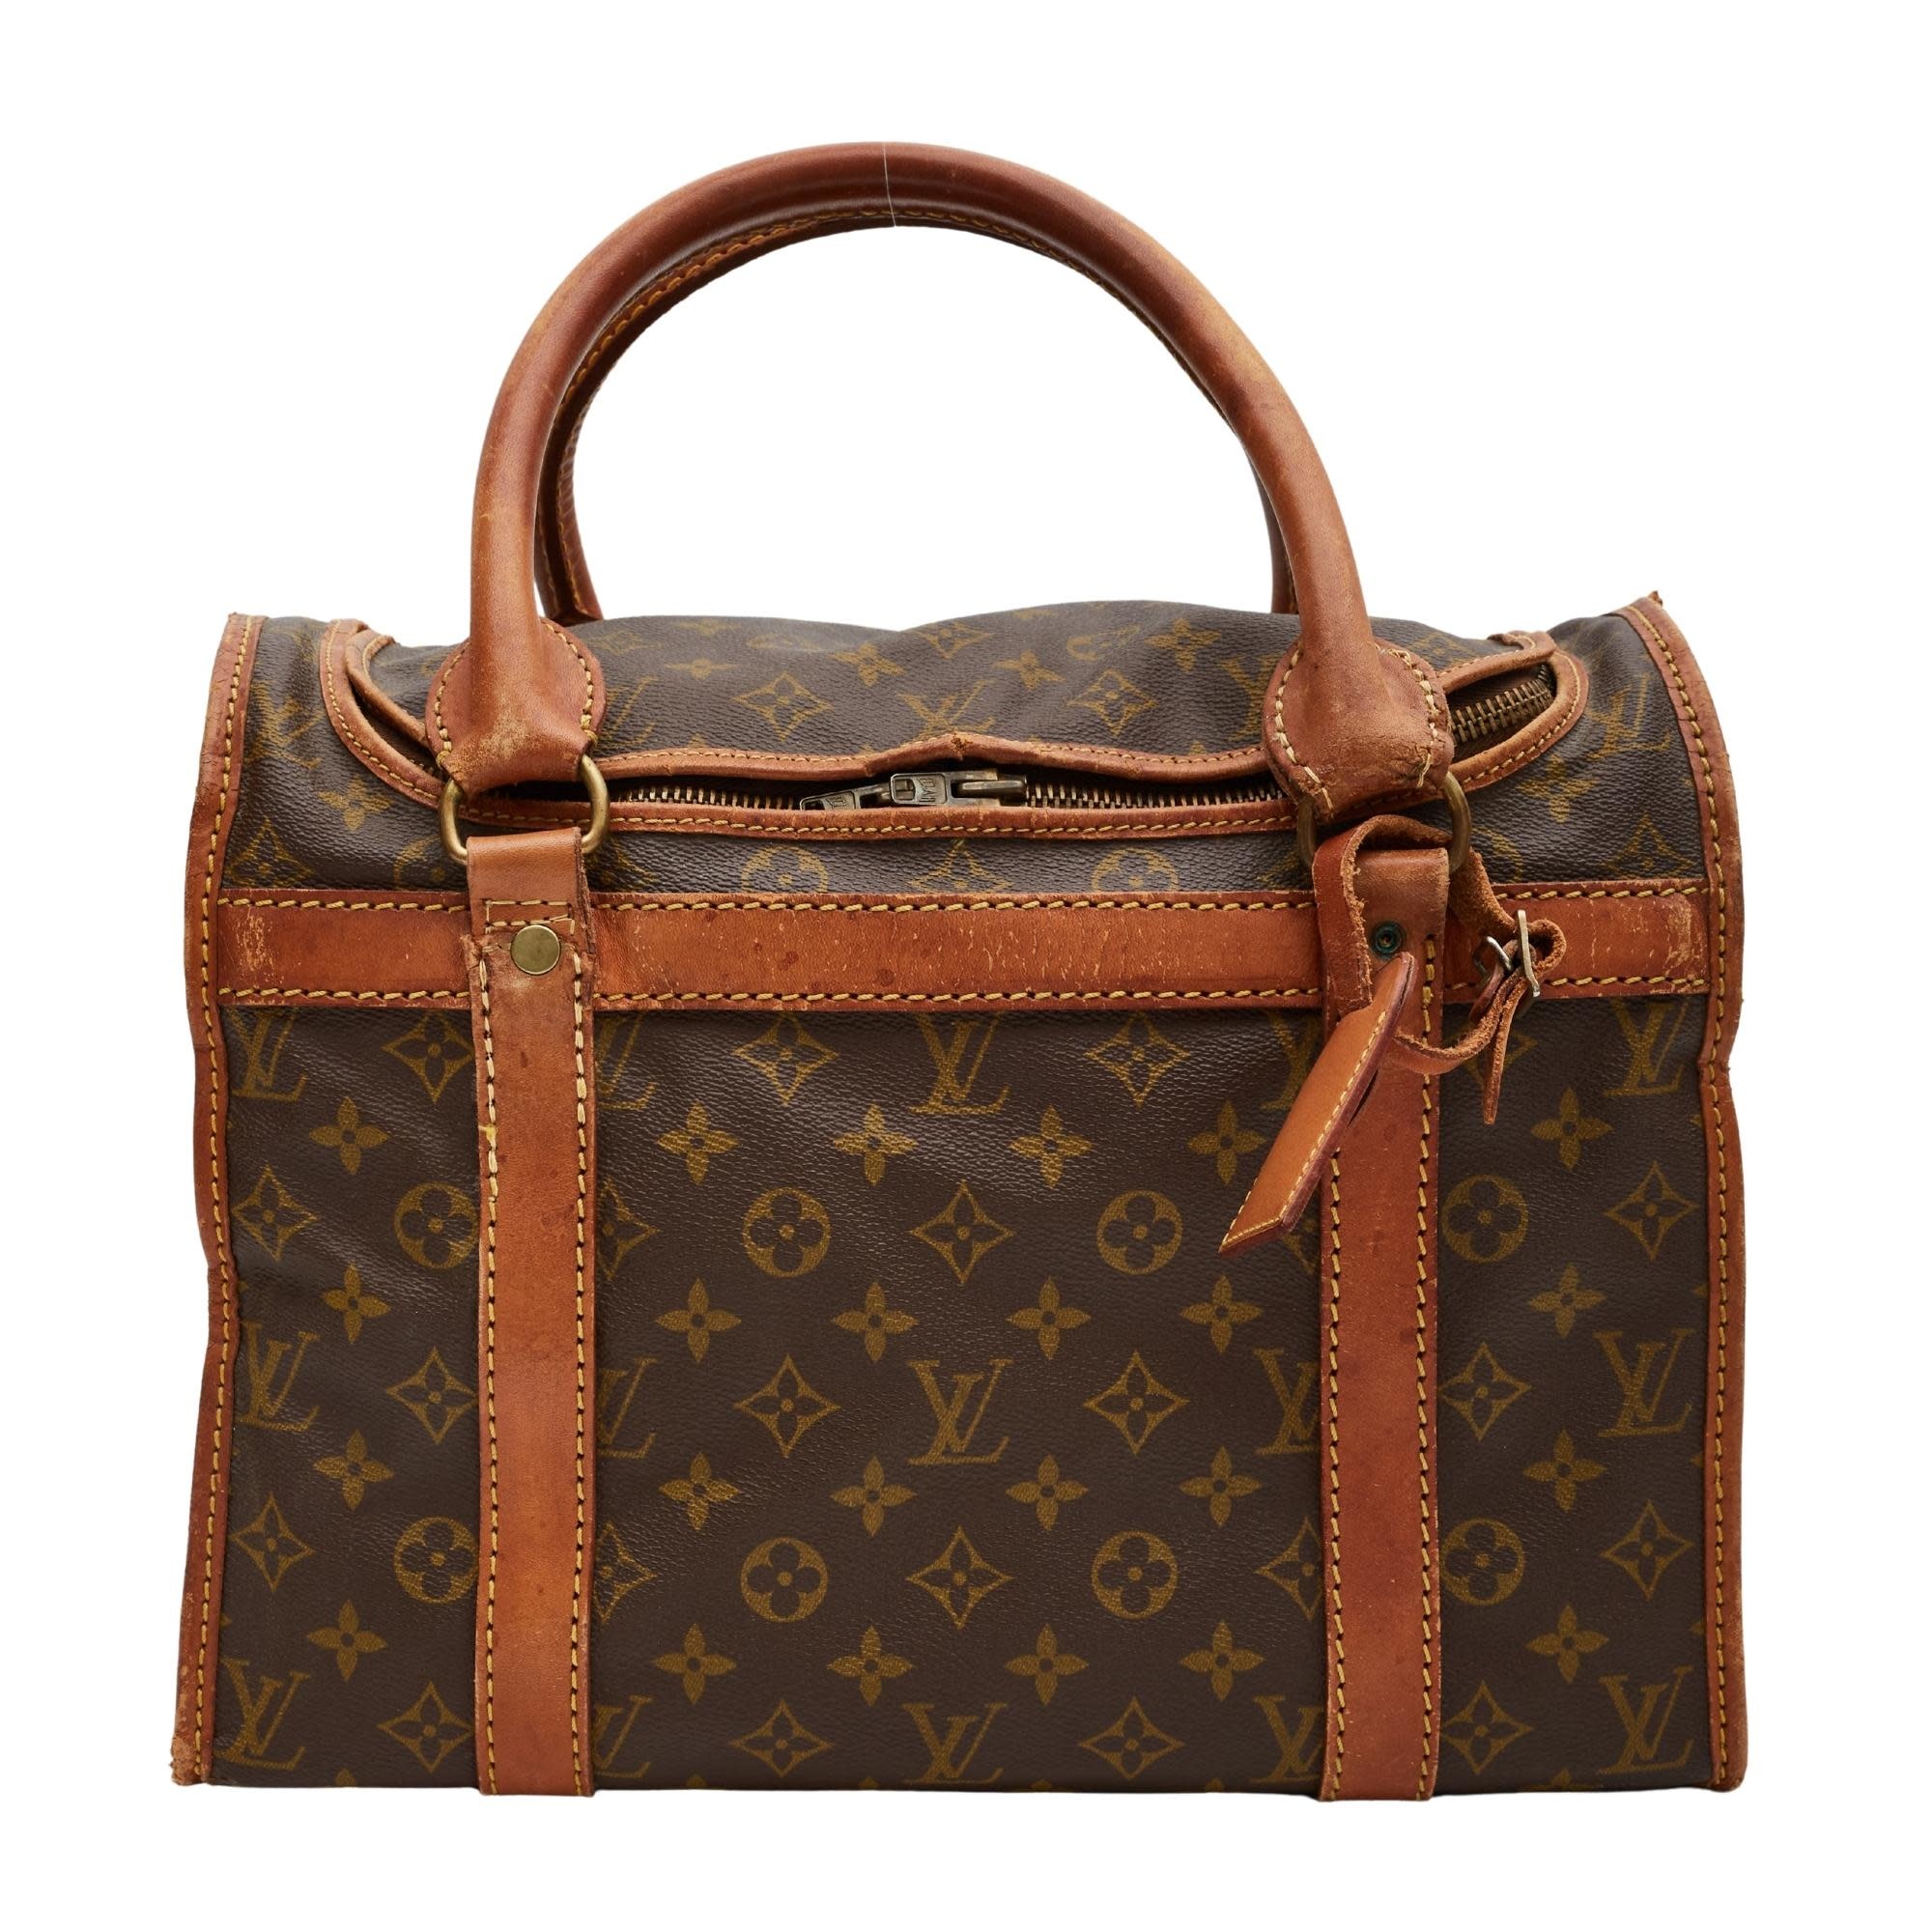 LOUIS VUITTON French Company Sac Chien Dog Pet Carrier 49600